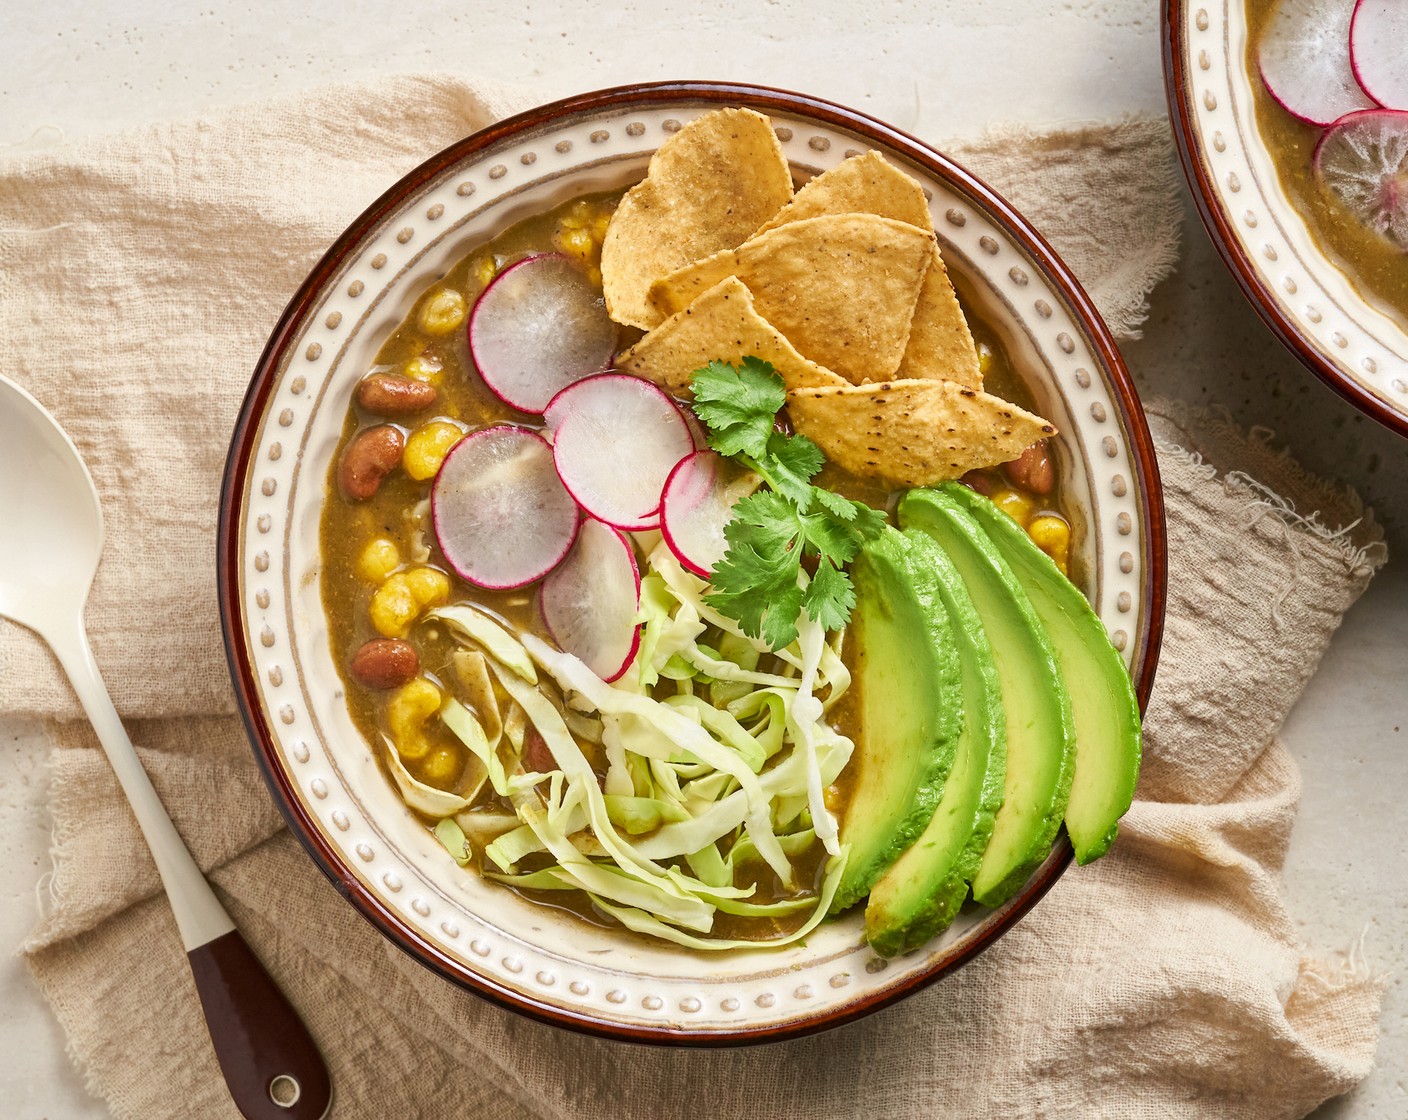 step 6 Transfer to a serving bowl and optionally top with Fresh Cilantro (to taste), Green Cabbage (to taste), Radishes (to taste), chopped onion, Avocados (to taste), Limes (to taste), and Tortilla Chips (to taste). Enjoy it warm!